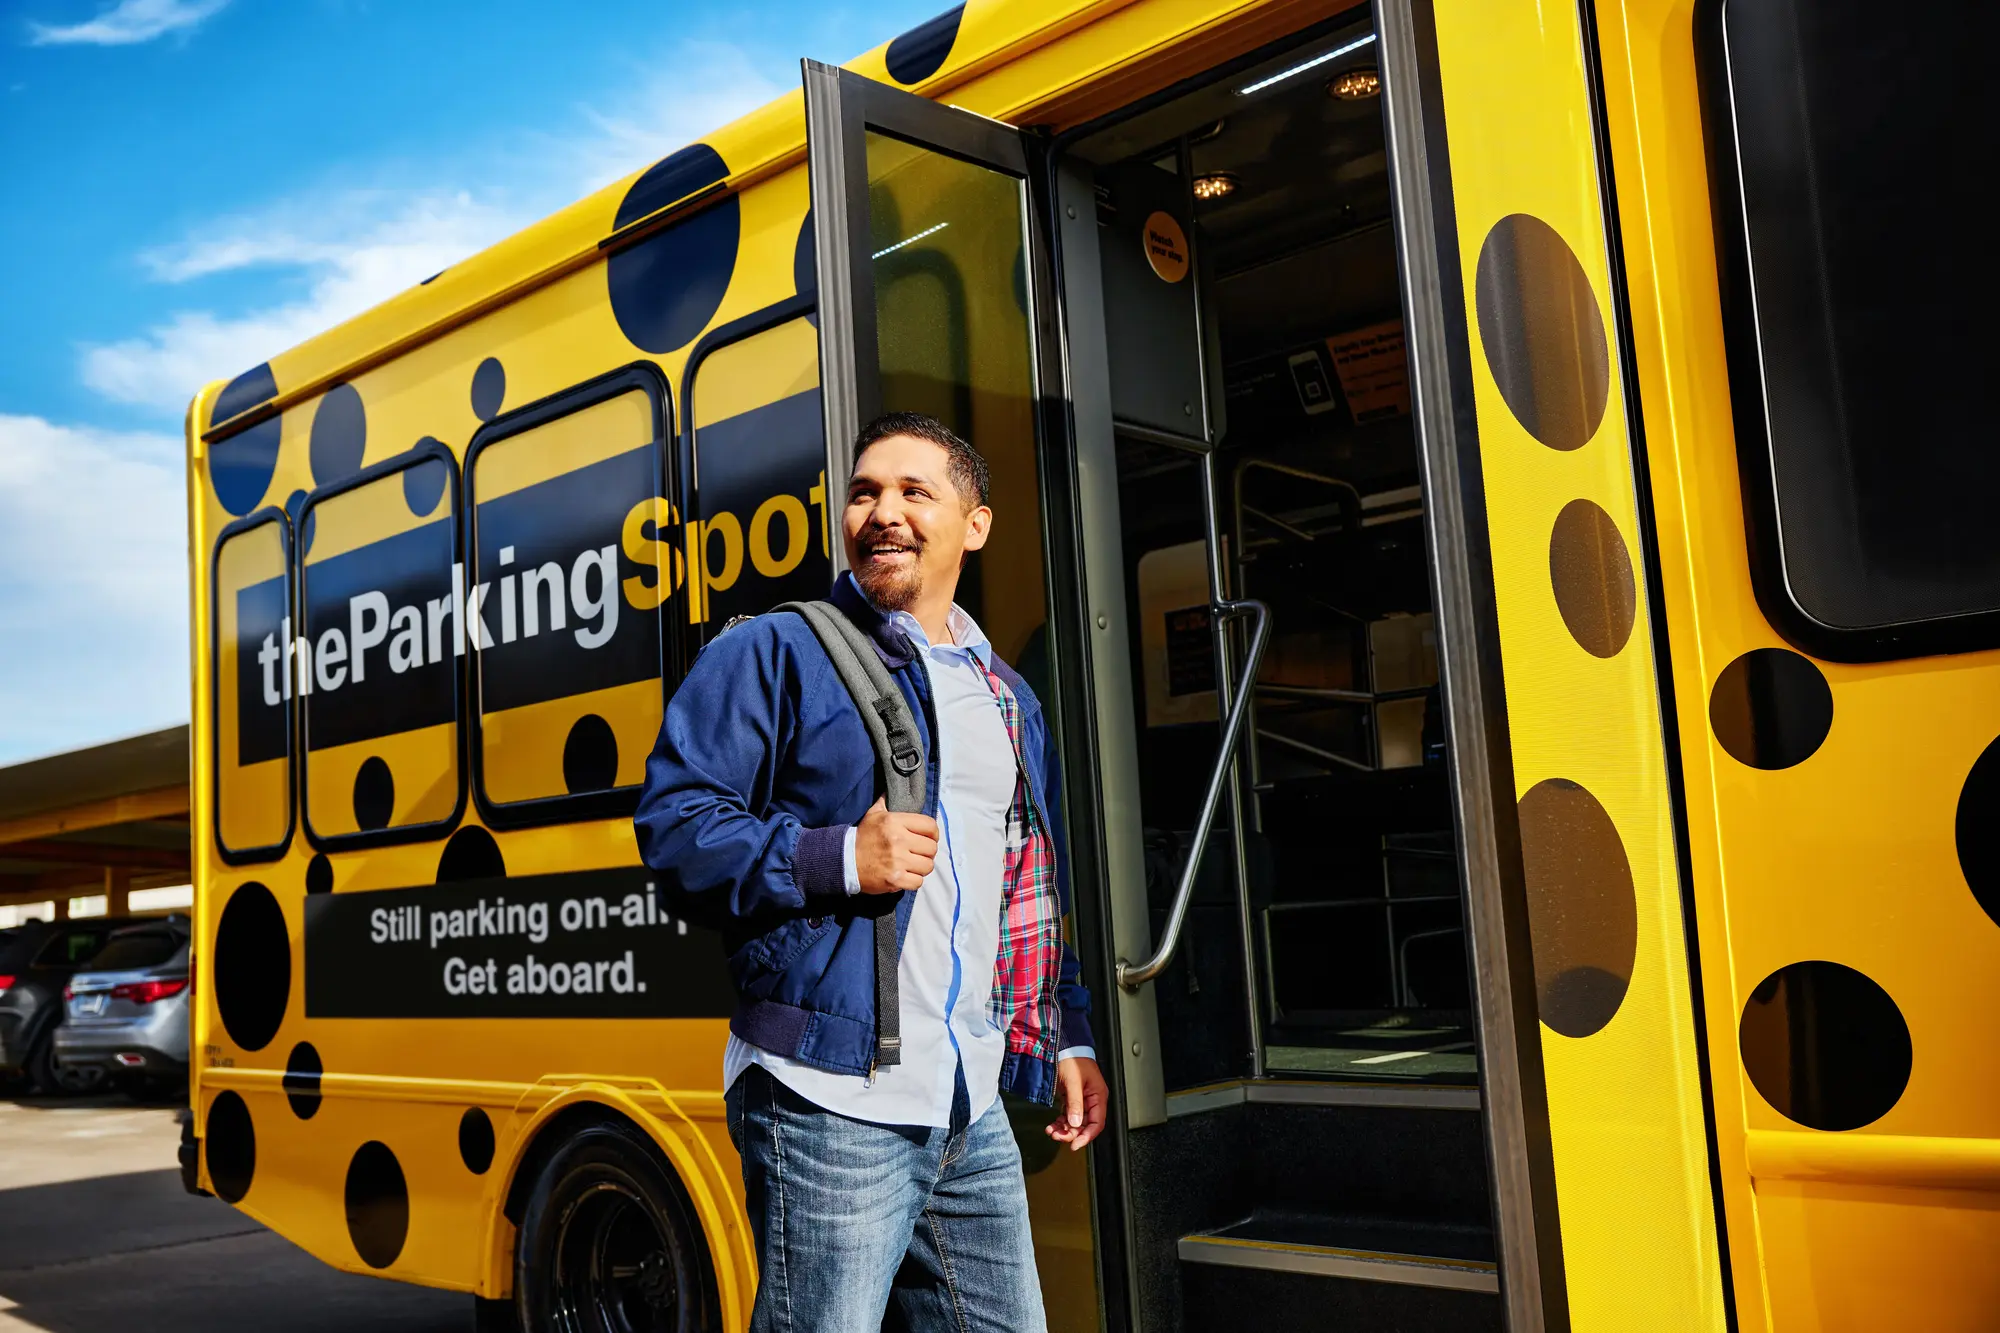 The Parking Spot guests are met at their vehicle by our airport shuttle drivers.